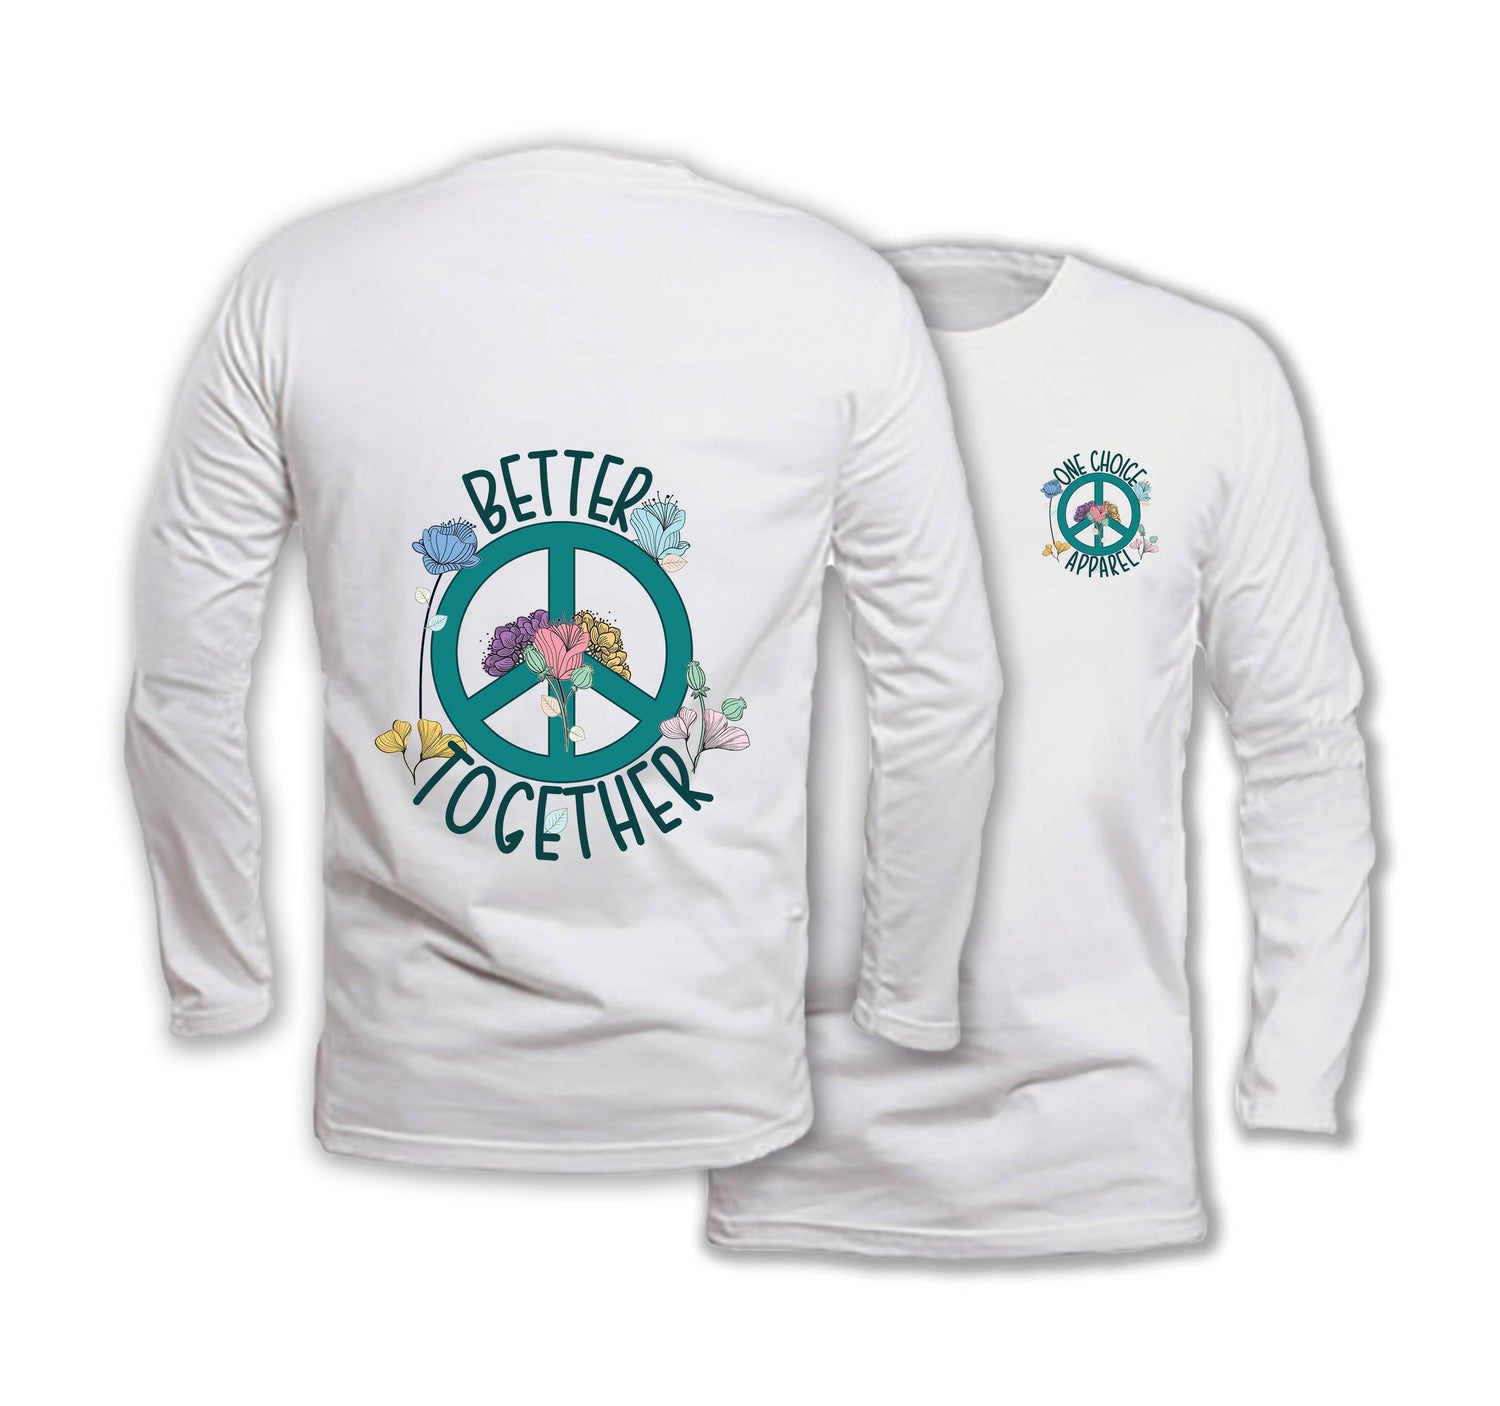 Better Together - Long Sleeve Organic Cotton T-Shirt - One Choice Apparel